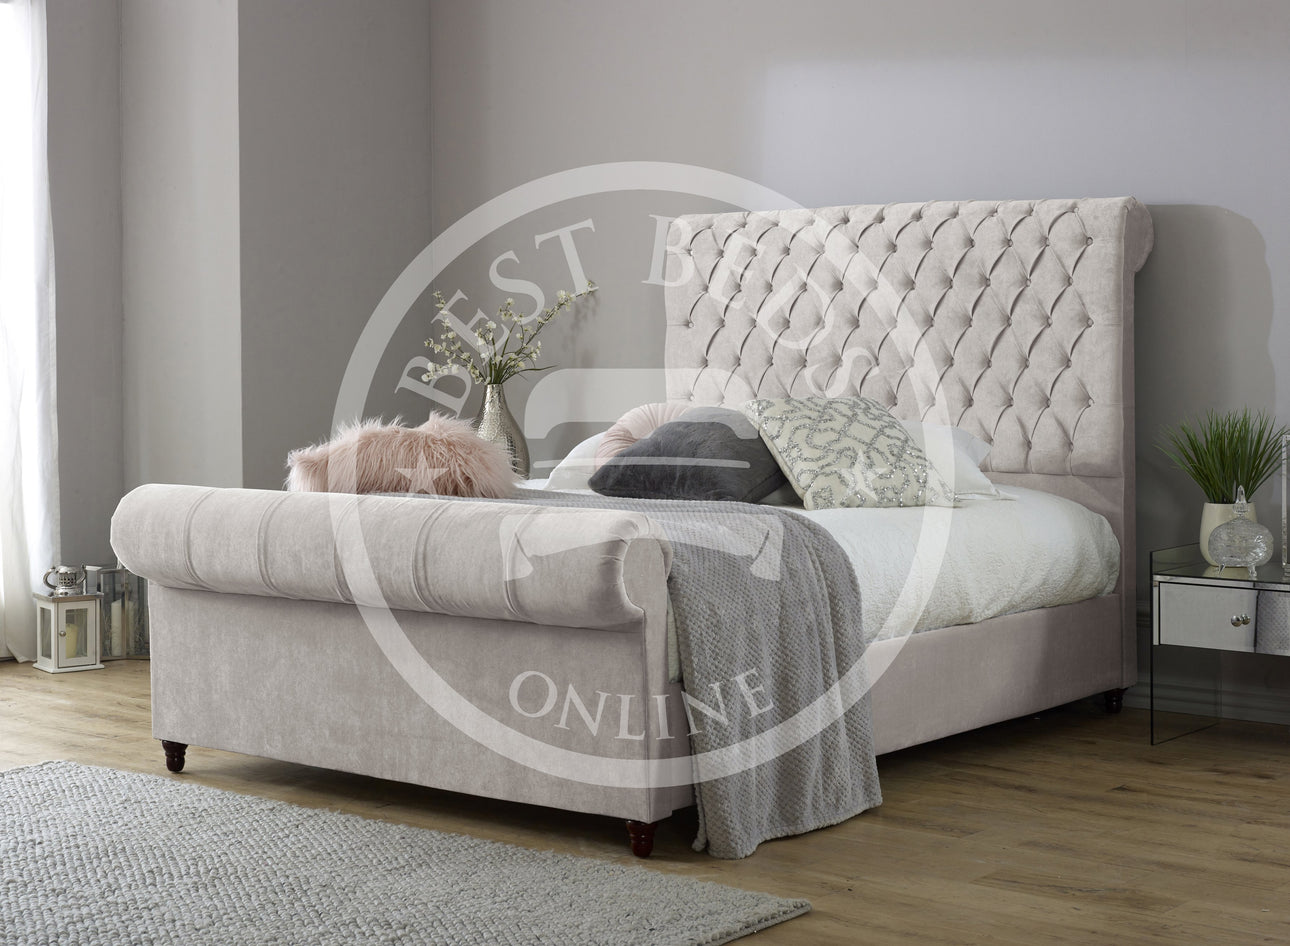 Denver Chesterfield Bed-single bed/double bed/king size bed